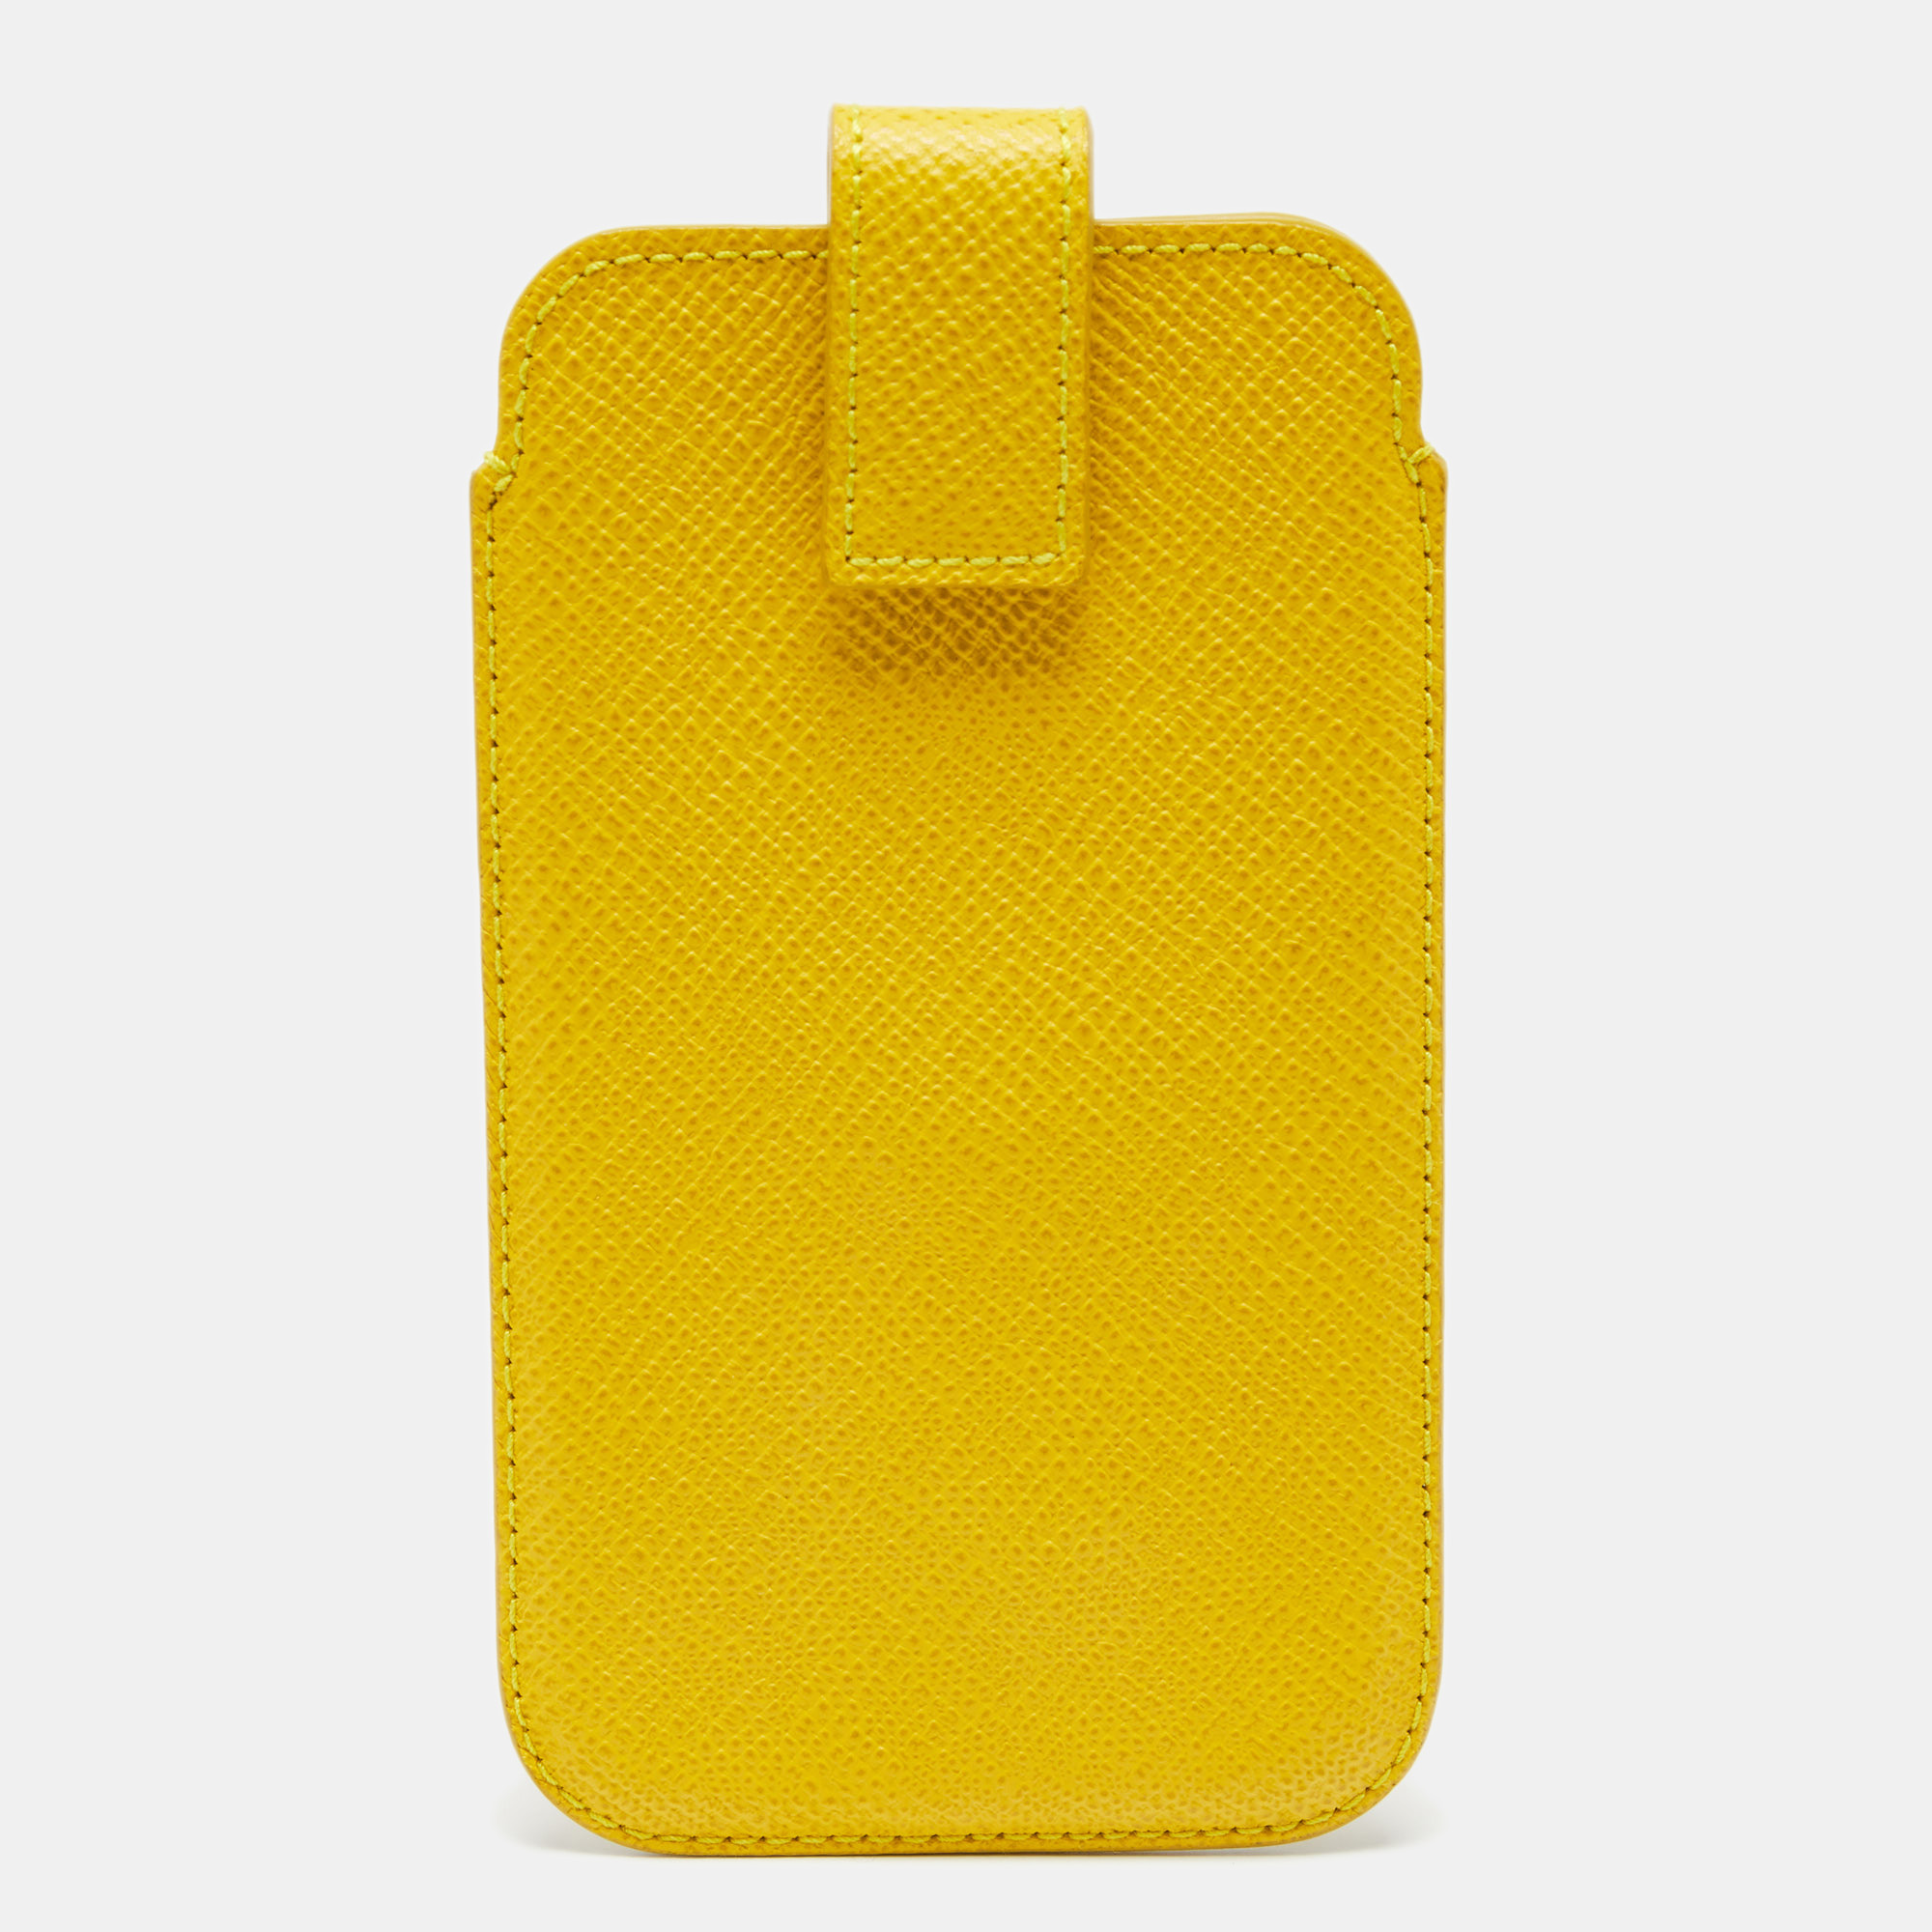 Smythson Yellow Leather Phone Cover